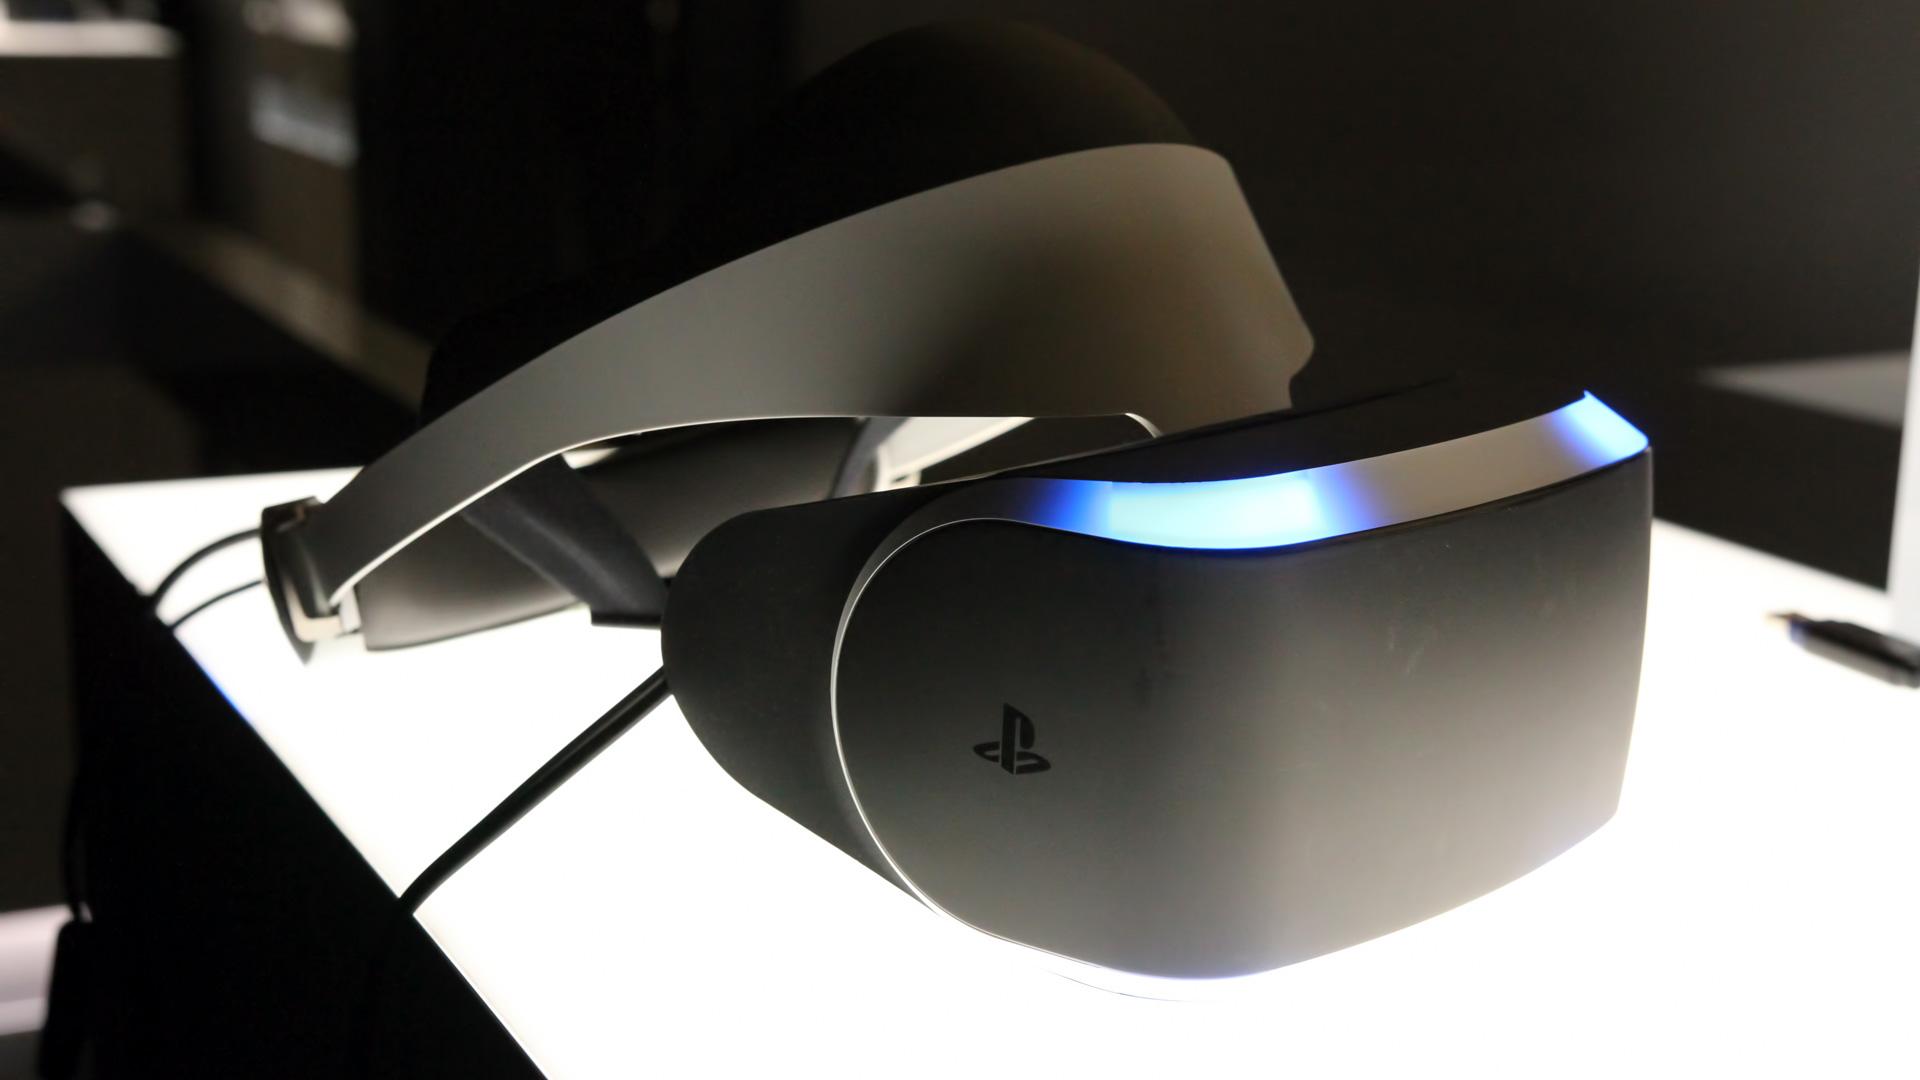 5 Things We Learned About Sony's VR Headset at GDC